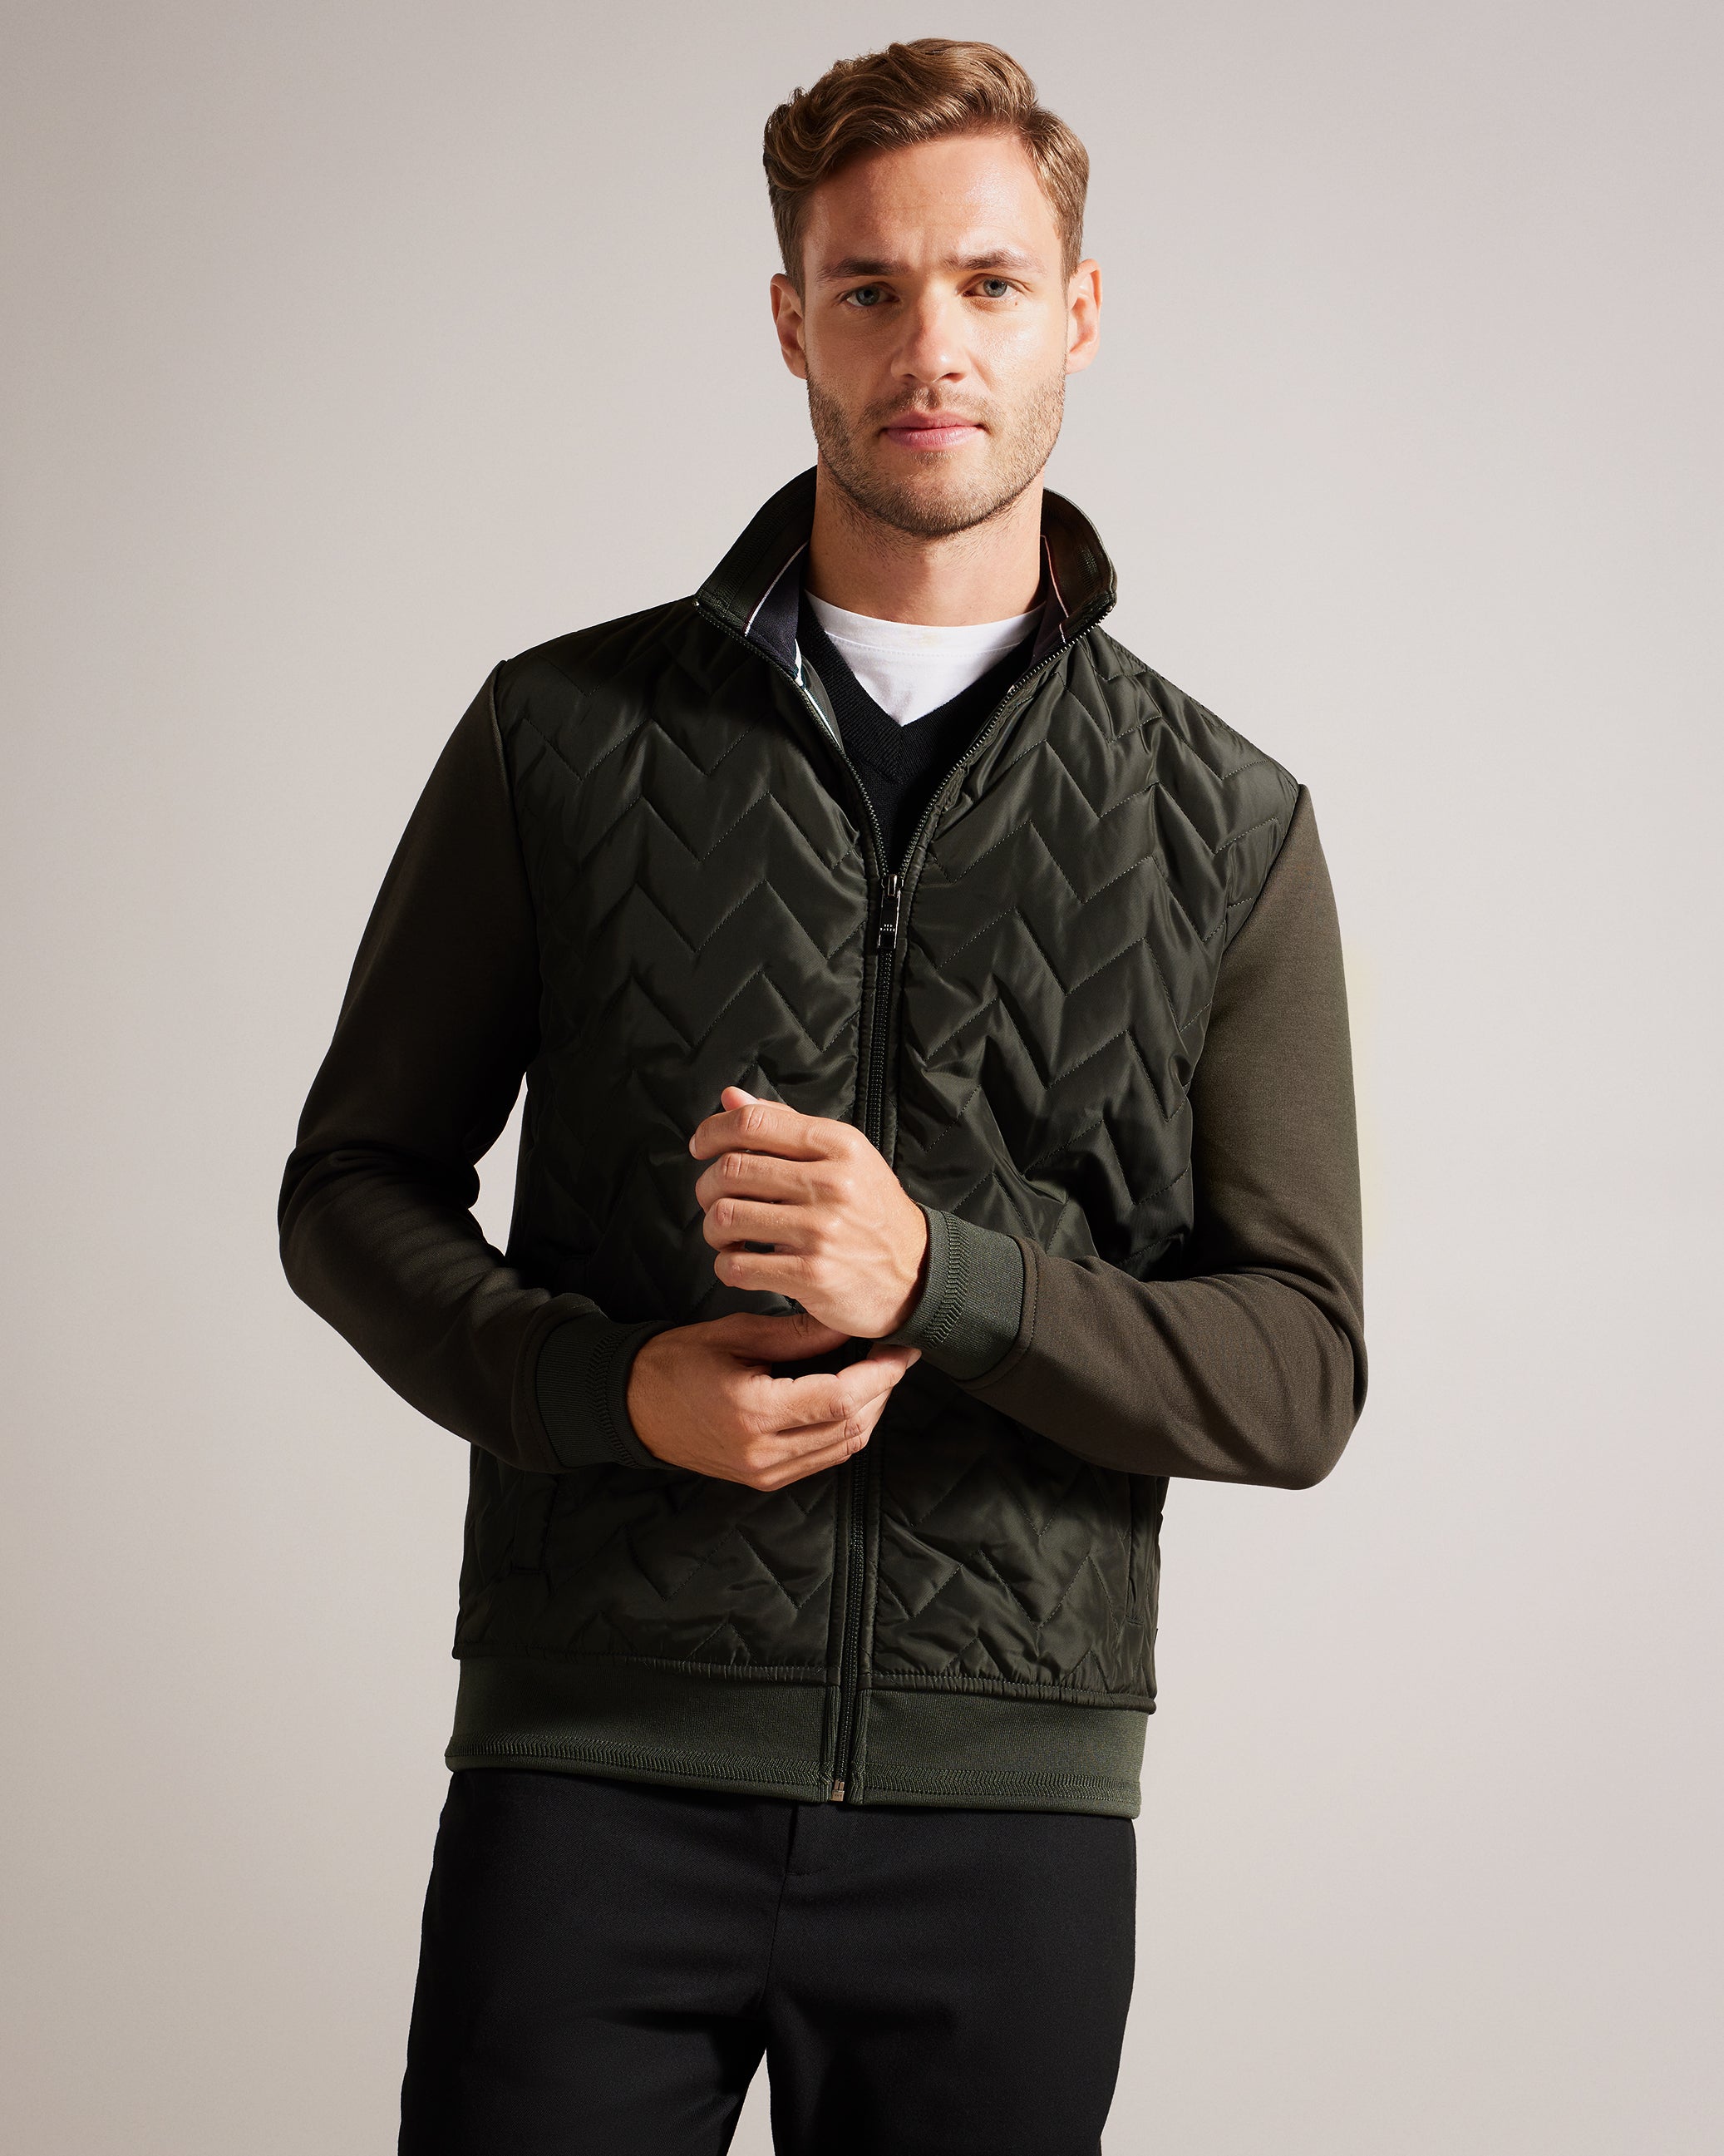 Men´s Quilted Jackets and Coats, Explore our New Arrivals